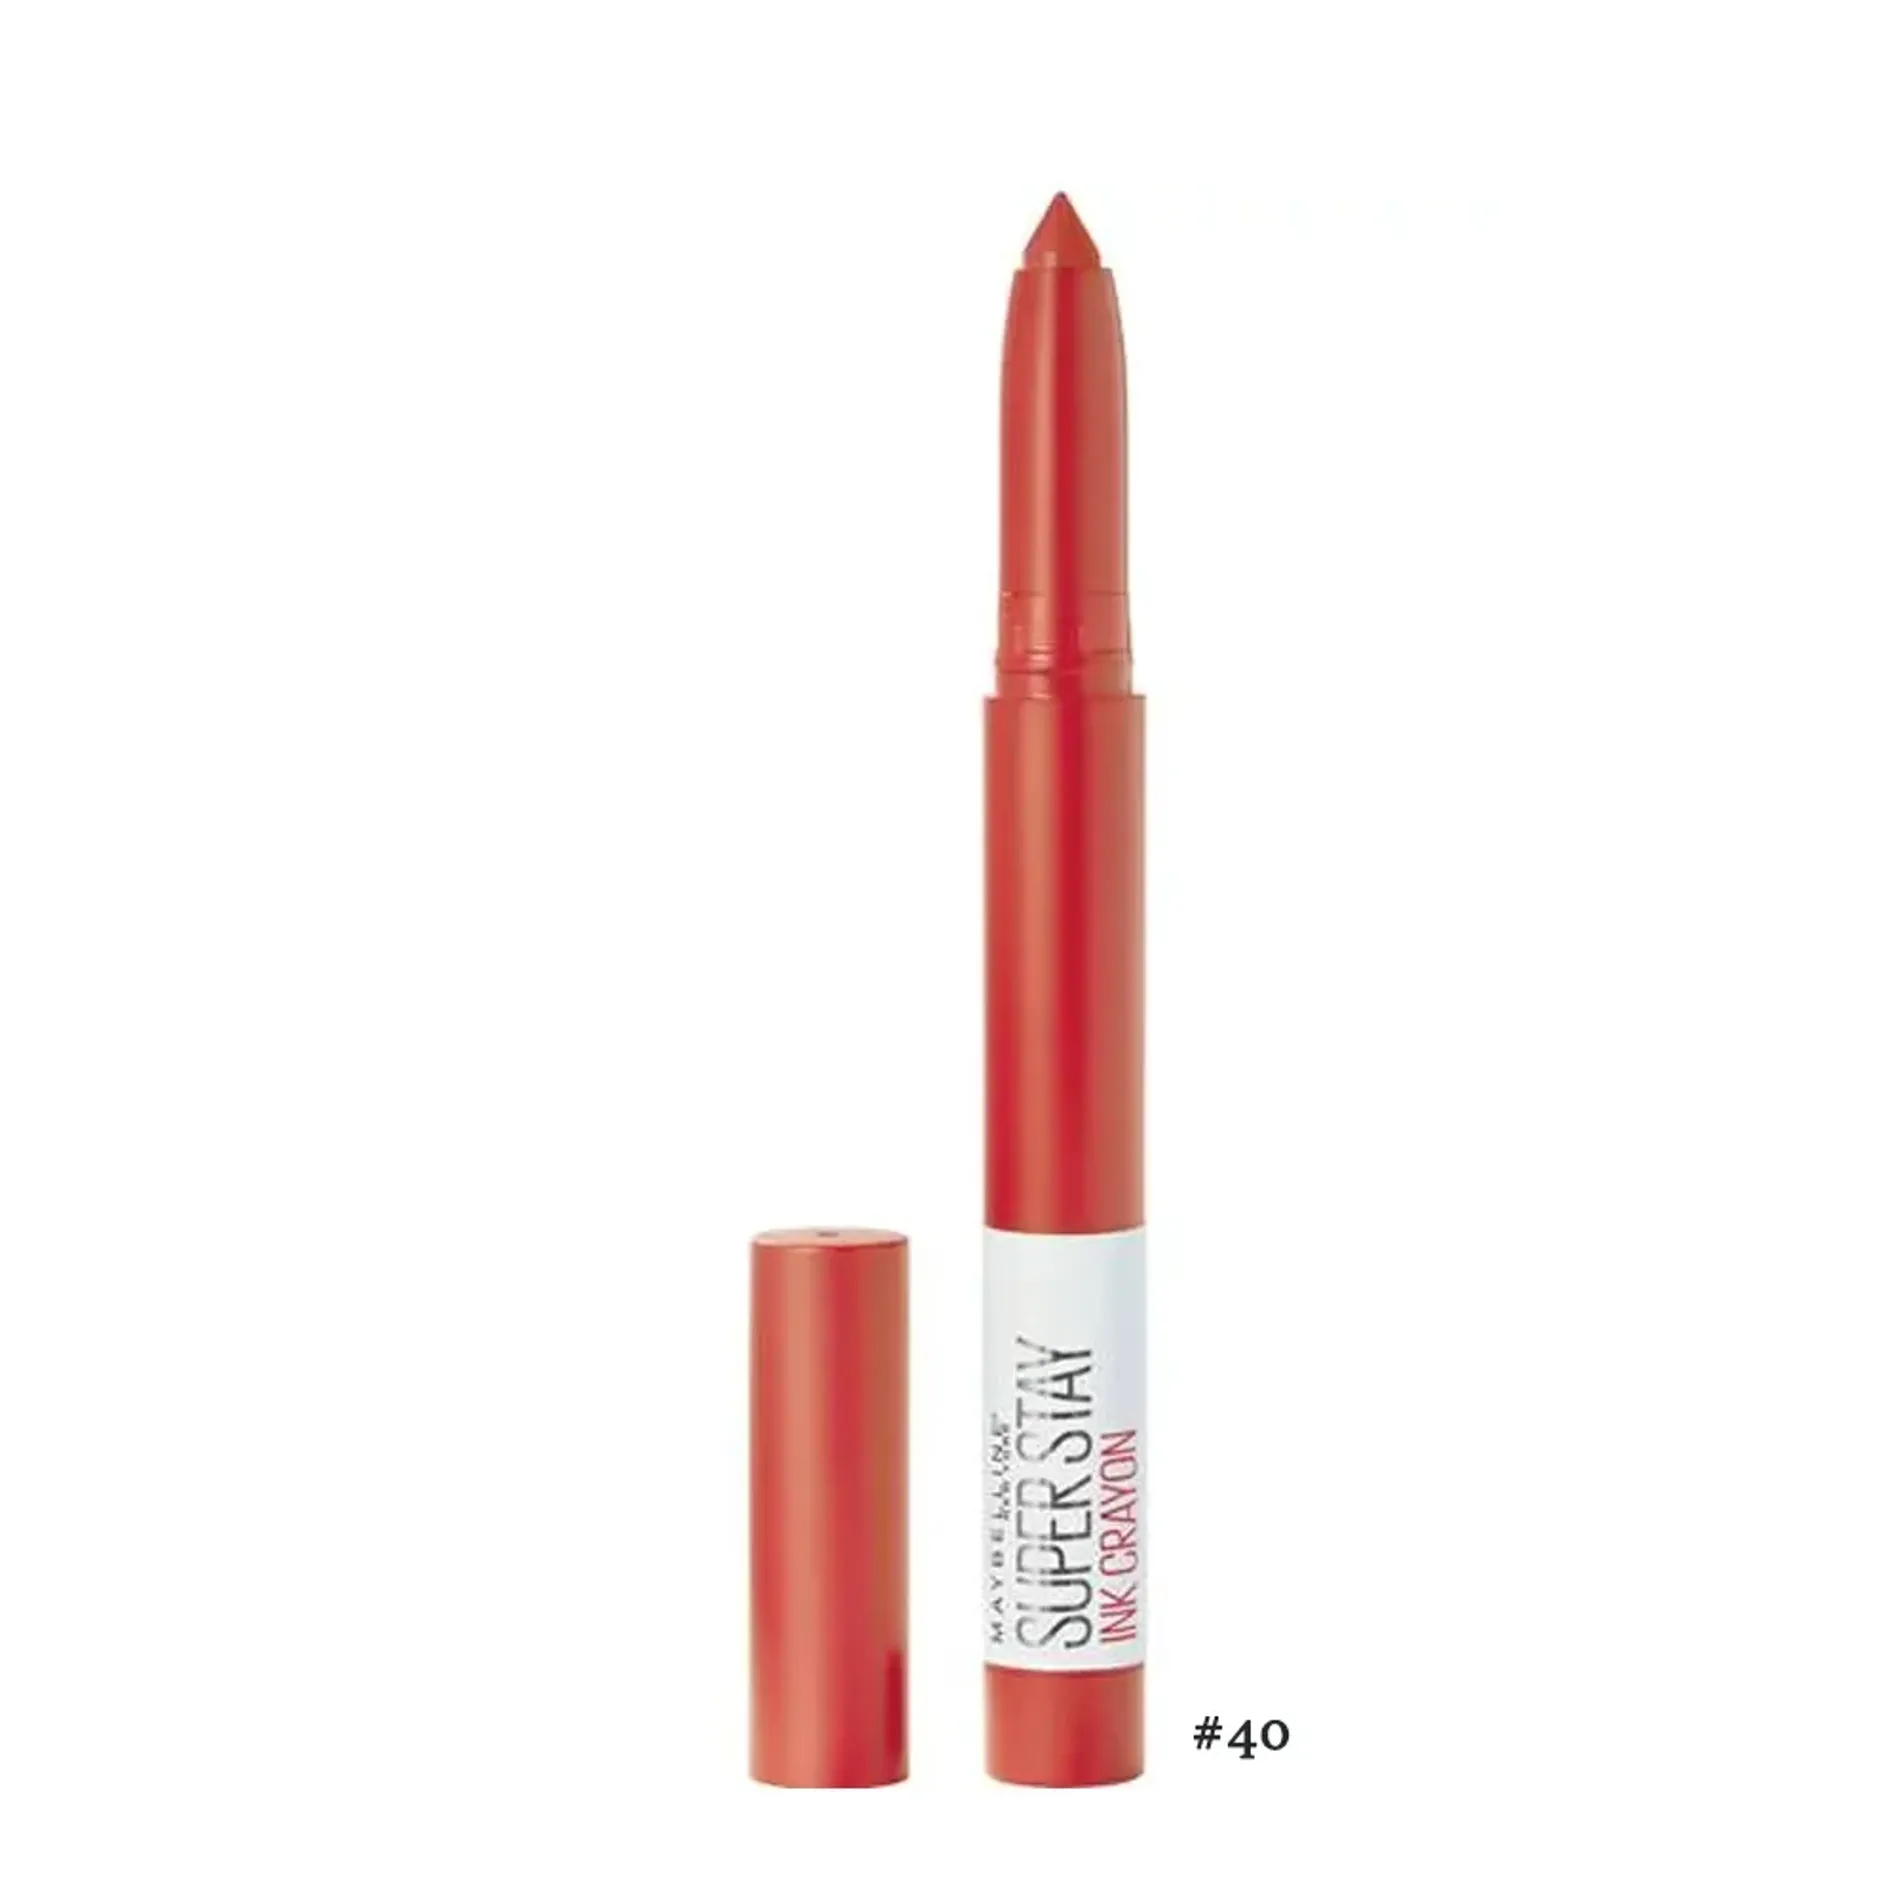 son-but-chi-lau-troi-maybelline-superstay-ink-crayon-3-9g-14